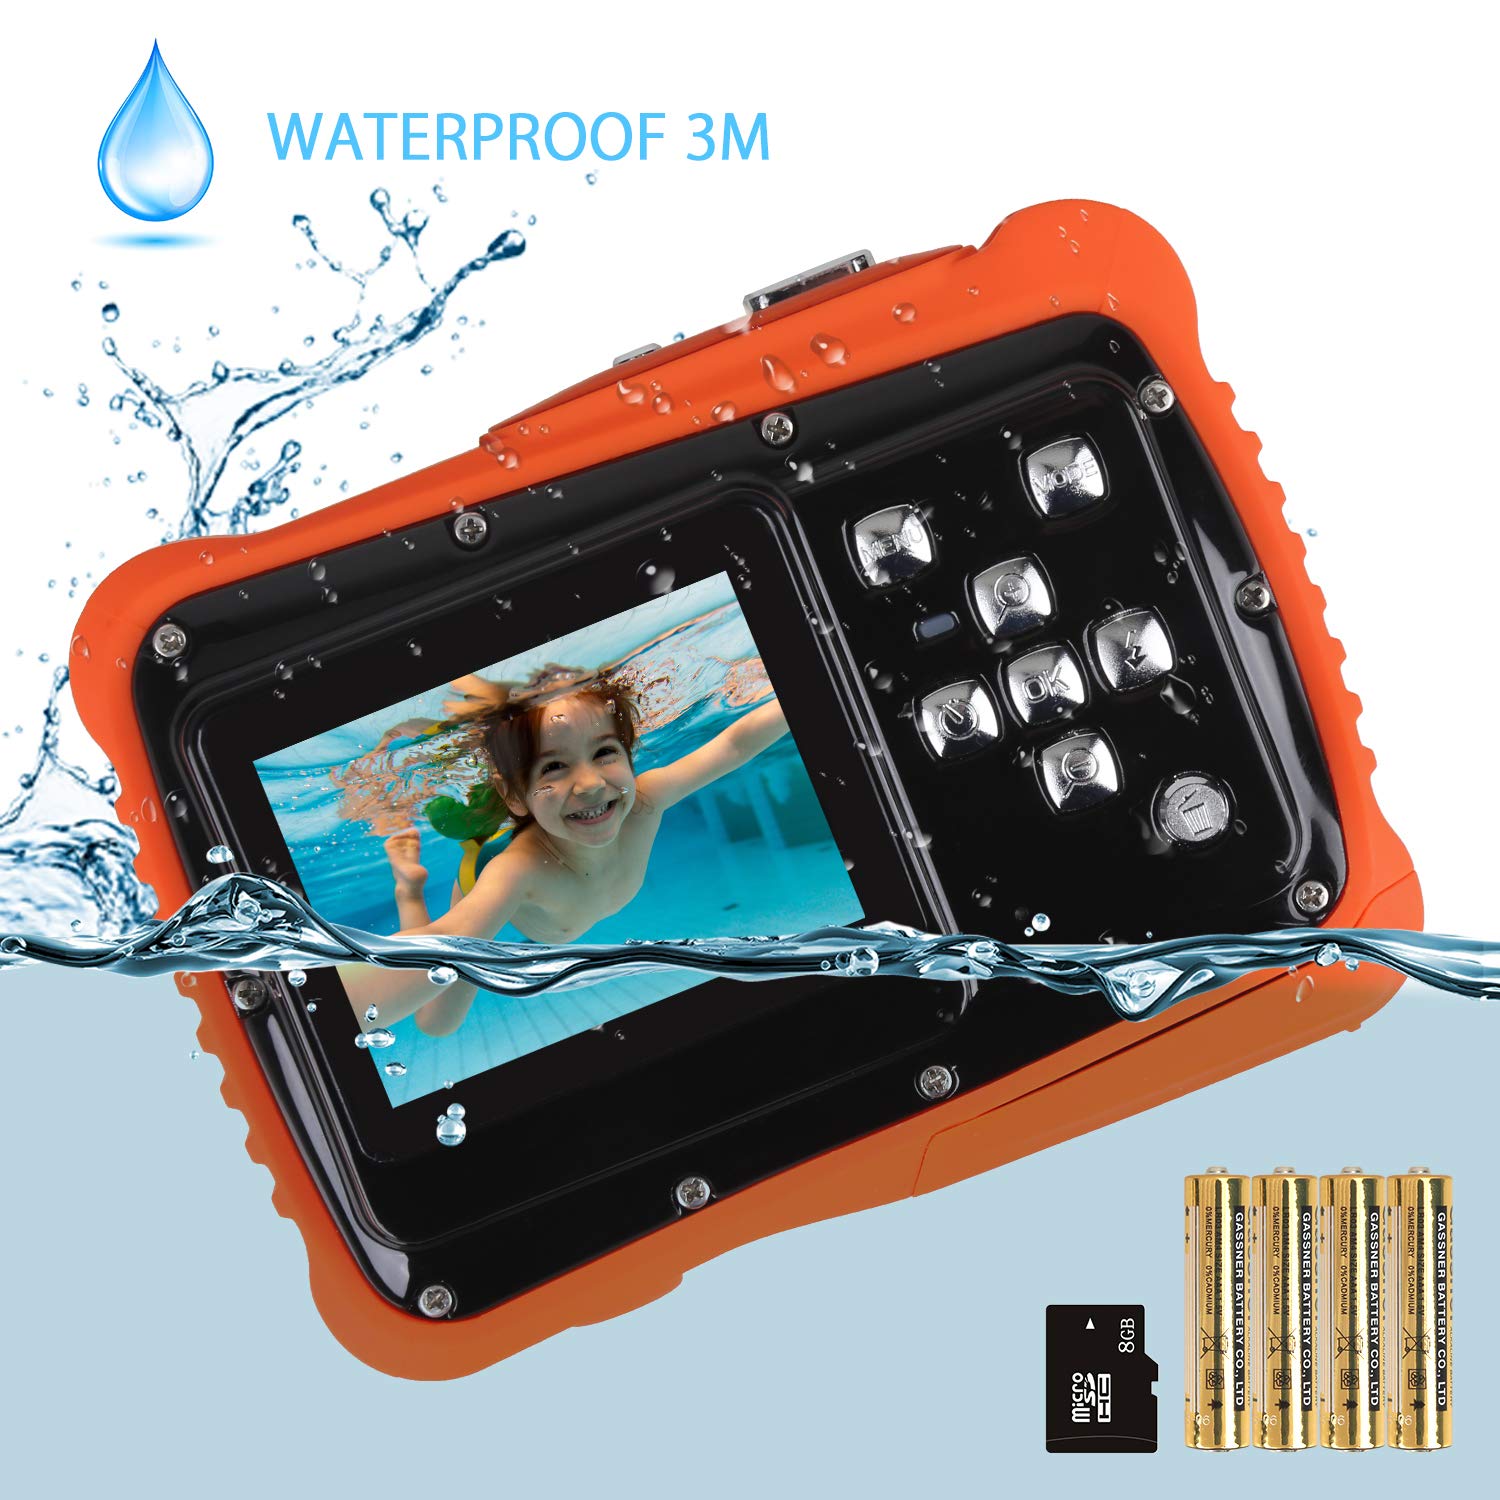 Kids Camera, Digital Waterproof Camera for Children with 3M Waterproof, 2 Inch LCD Screen, 12MP HD Resolution, 8X Digital Zoom and Flash 